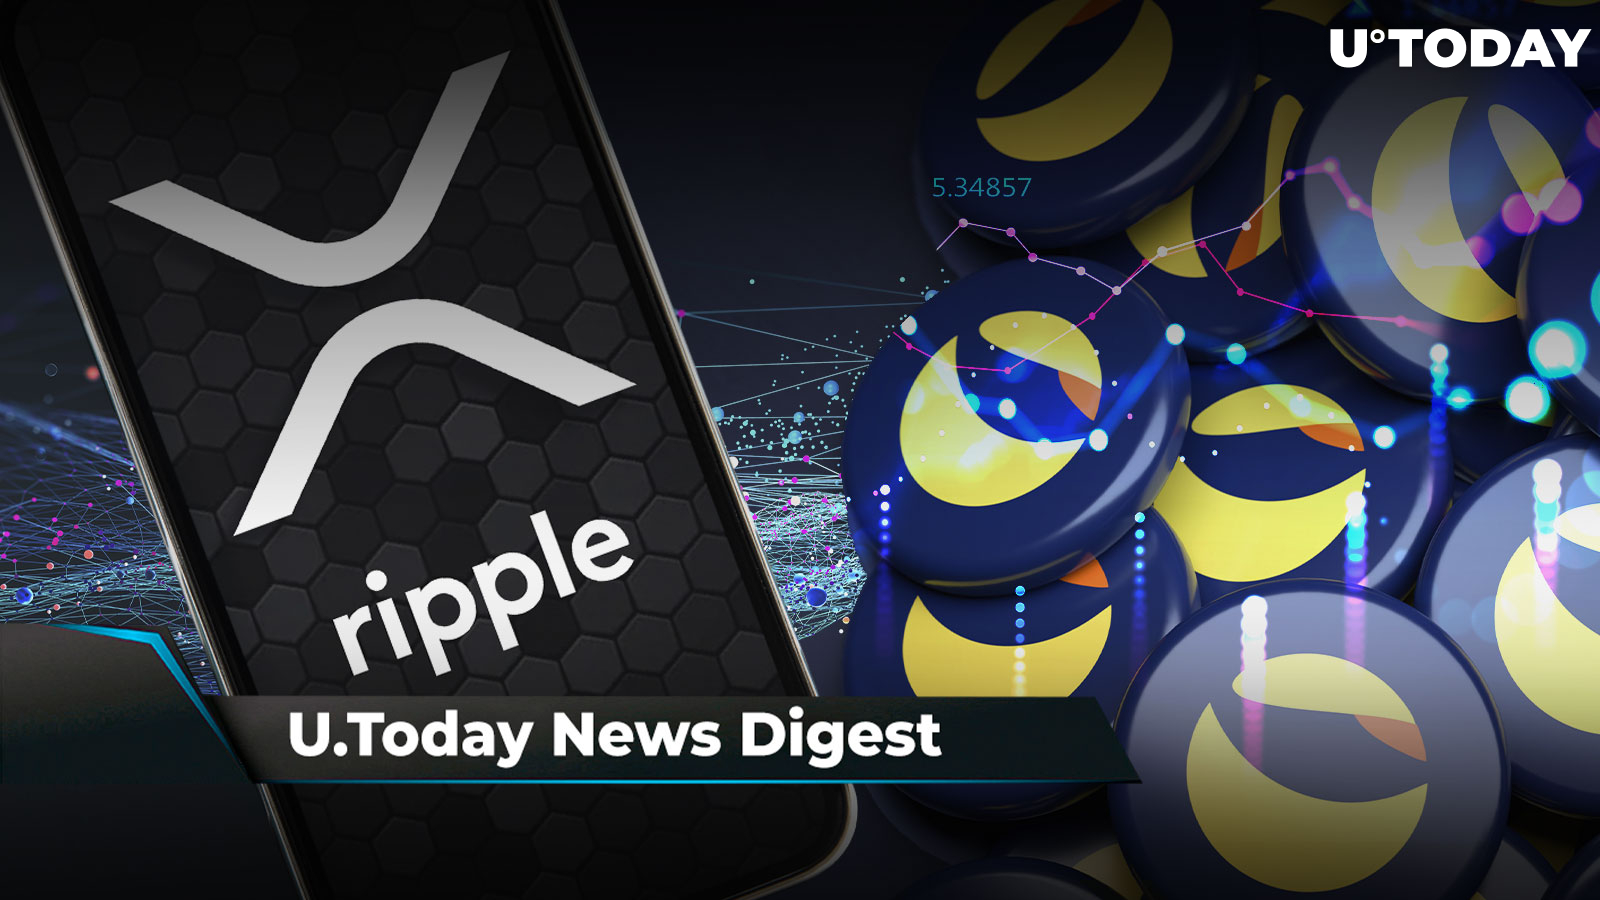 Ripple may be the new bitcoin dc gamebet